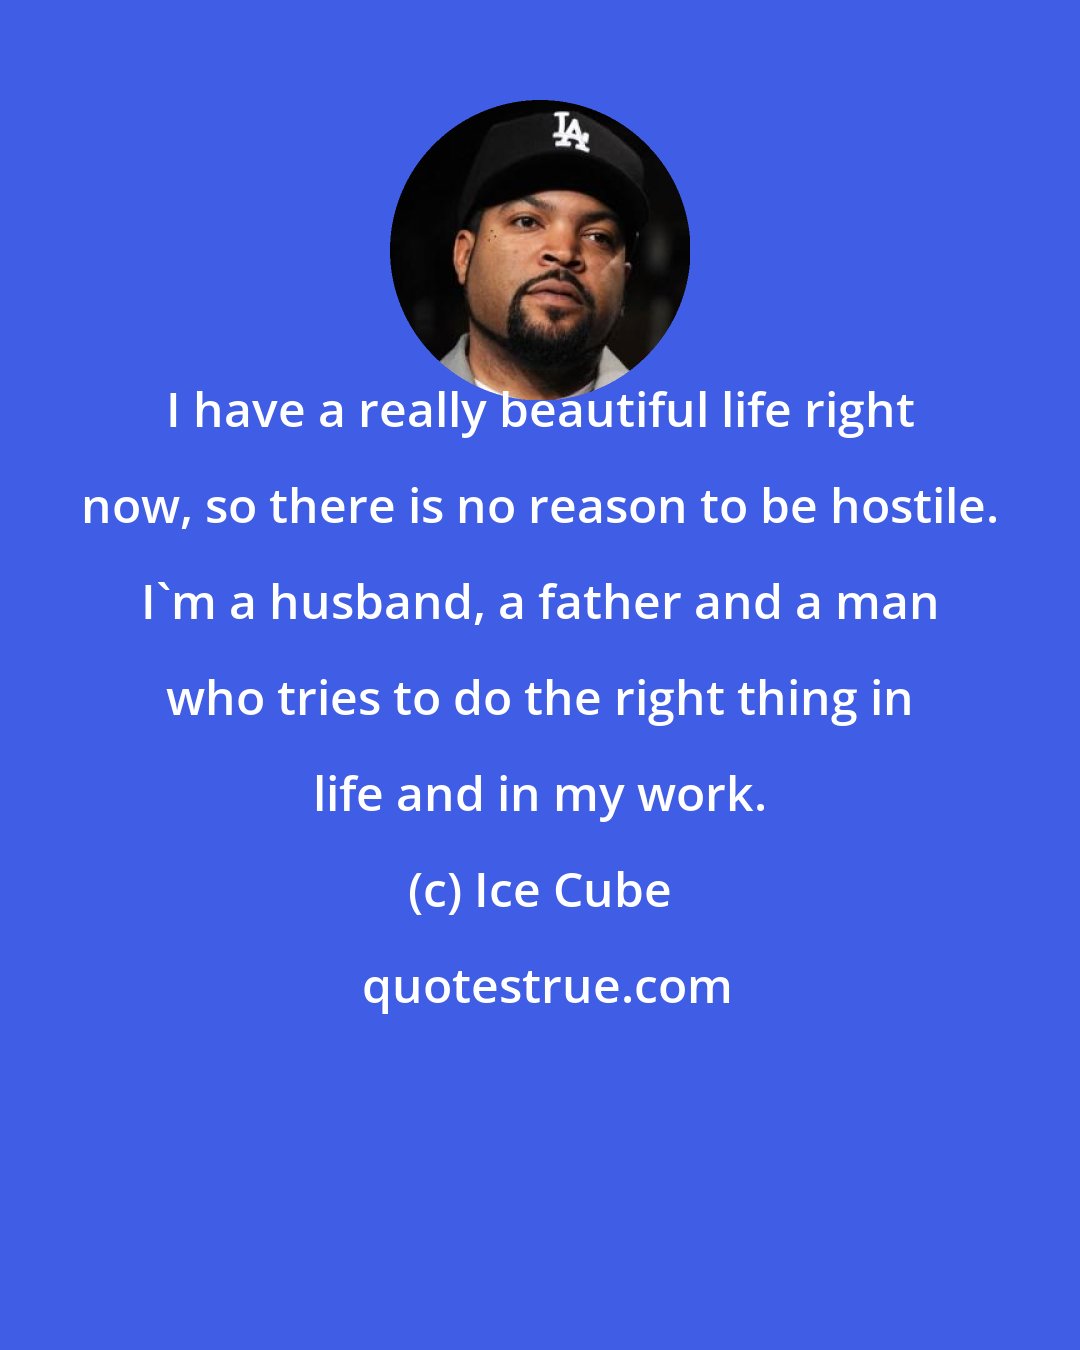 Ice Cube: I have a really beautiful life right now, so there is no reason to be hostile. I'm a husband, a father and a man who tries to do the right thing in life and in my work.